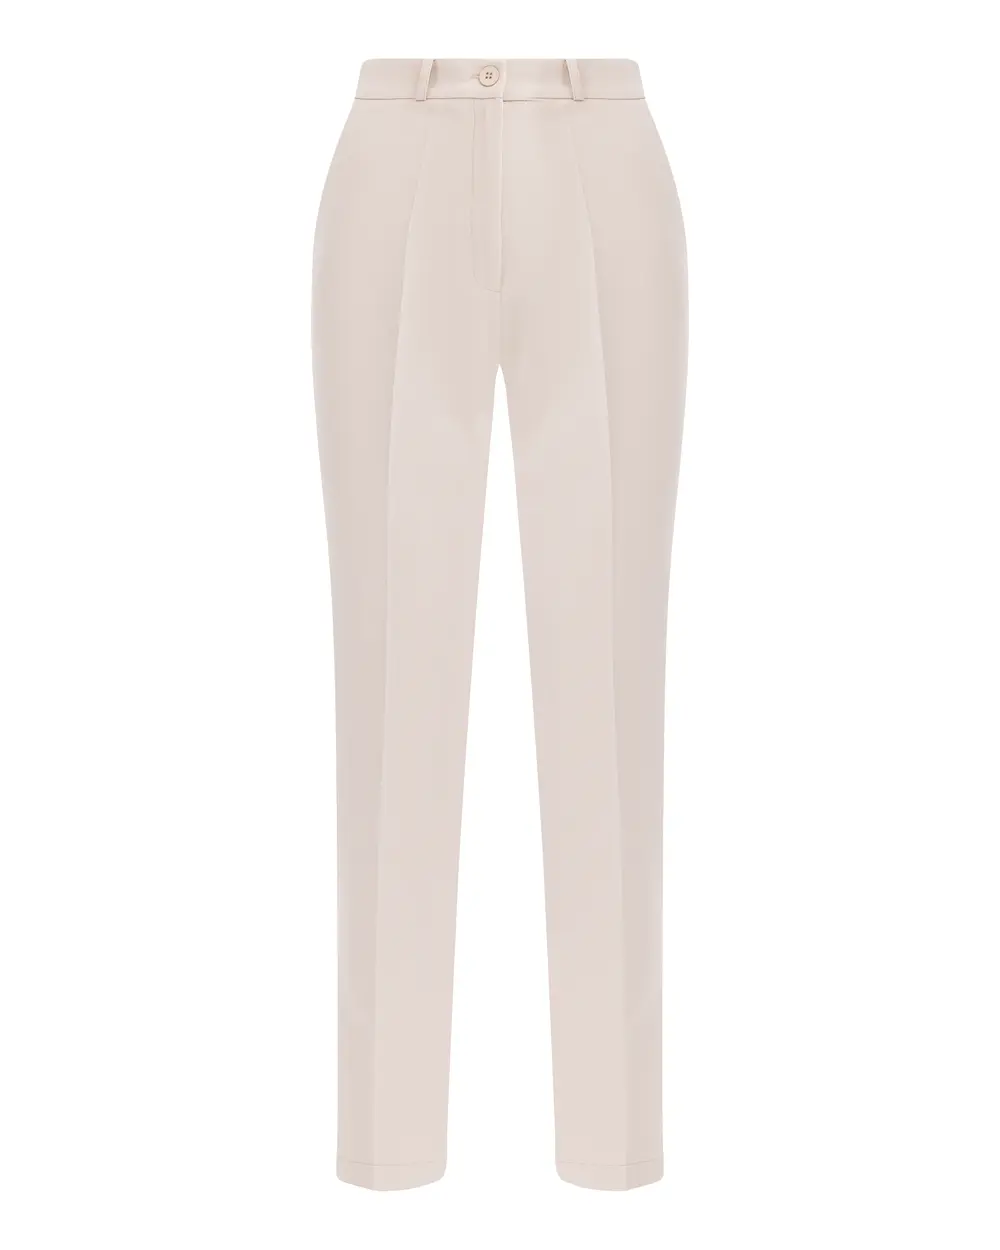 Buttoned Ankle Length Pants